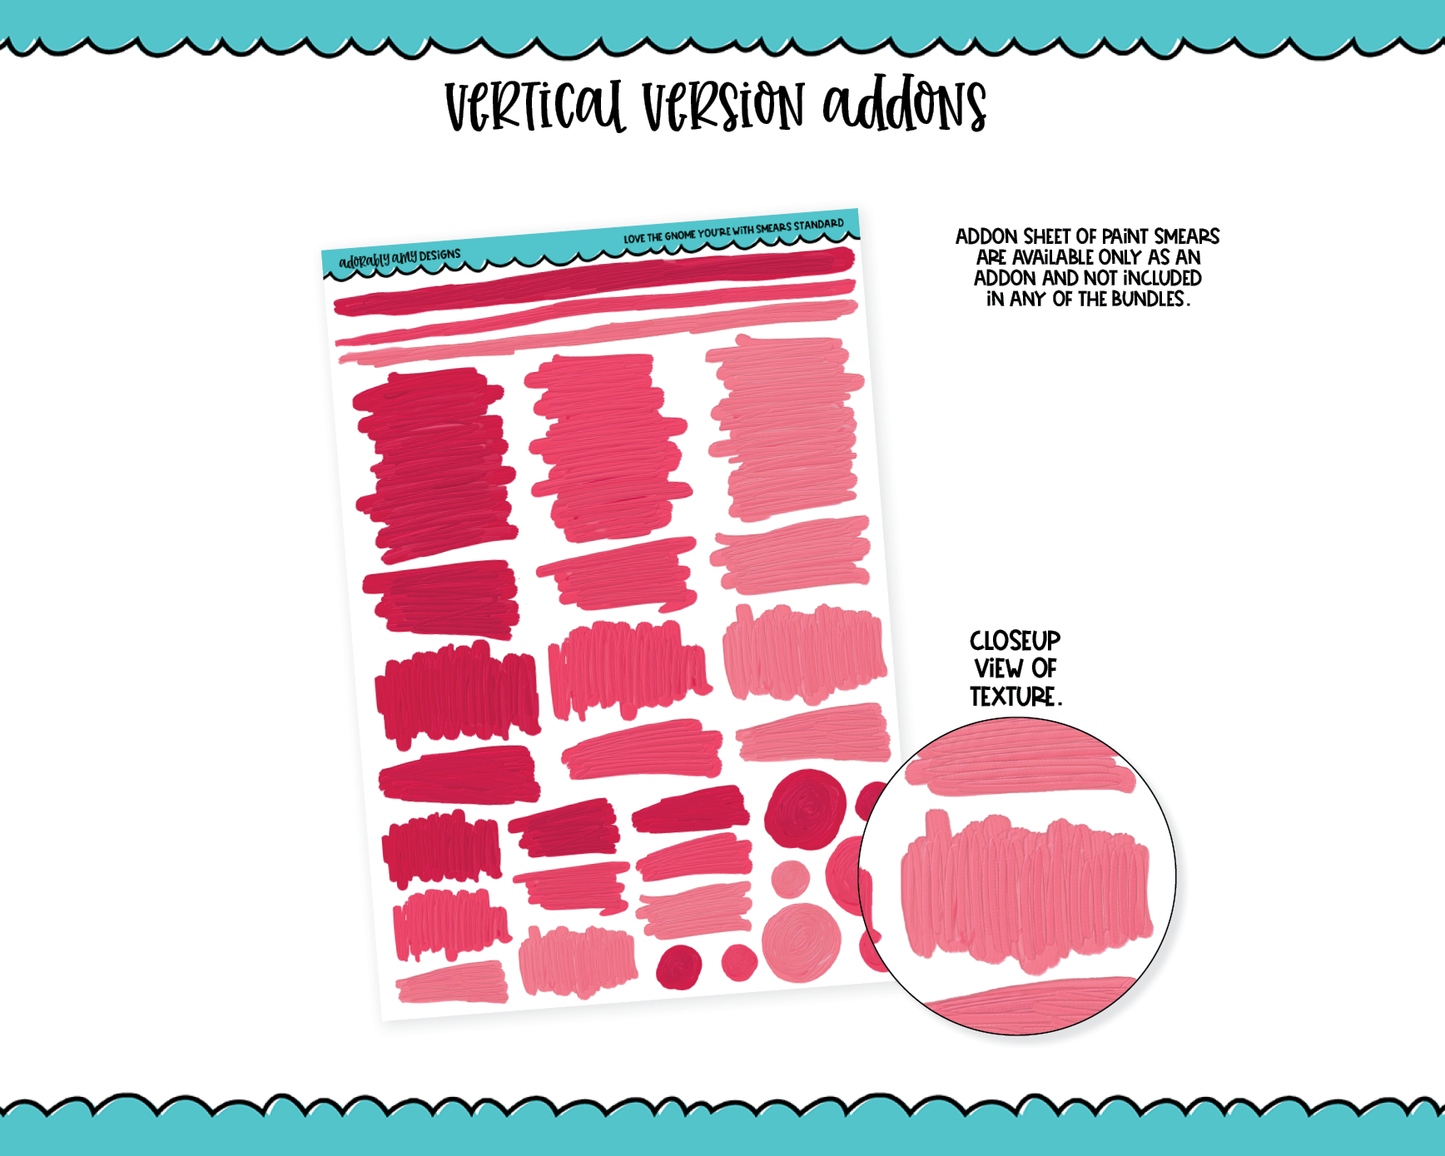 Vertical Love the Gnome You're With Valentine Holiday Themed Planner Sticker Kit for Vertical Standard Size Planners or Inserts